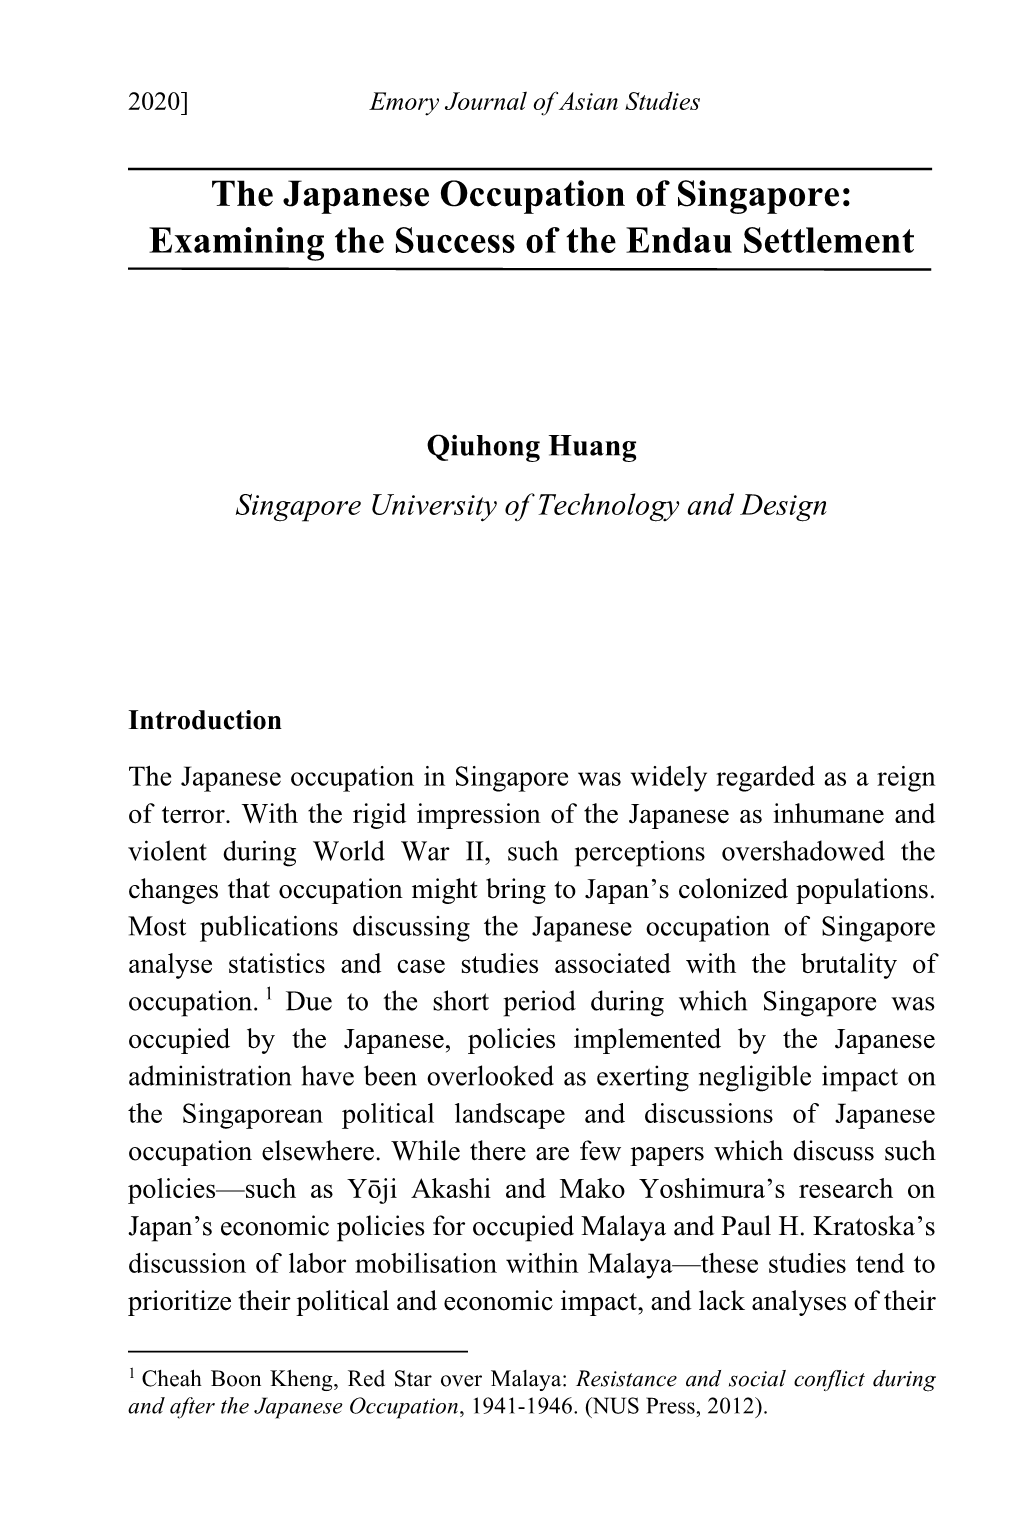 The Japanese Occupation of Singapore: Examining the Success of the Endau Settlement